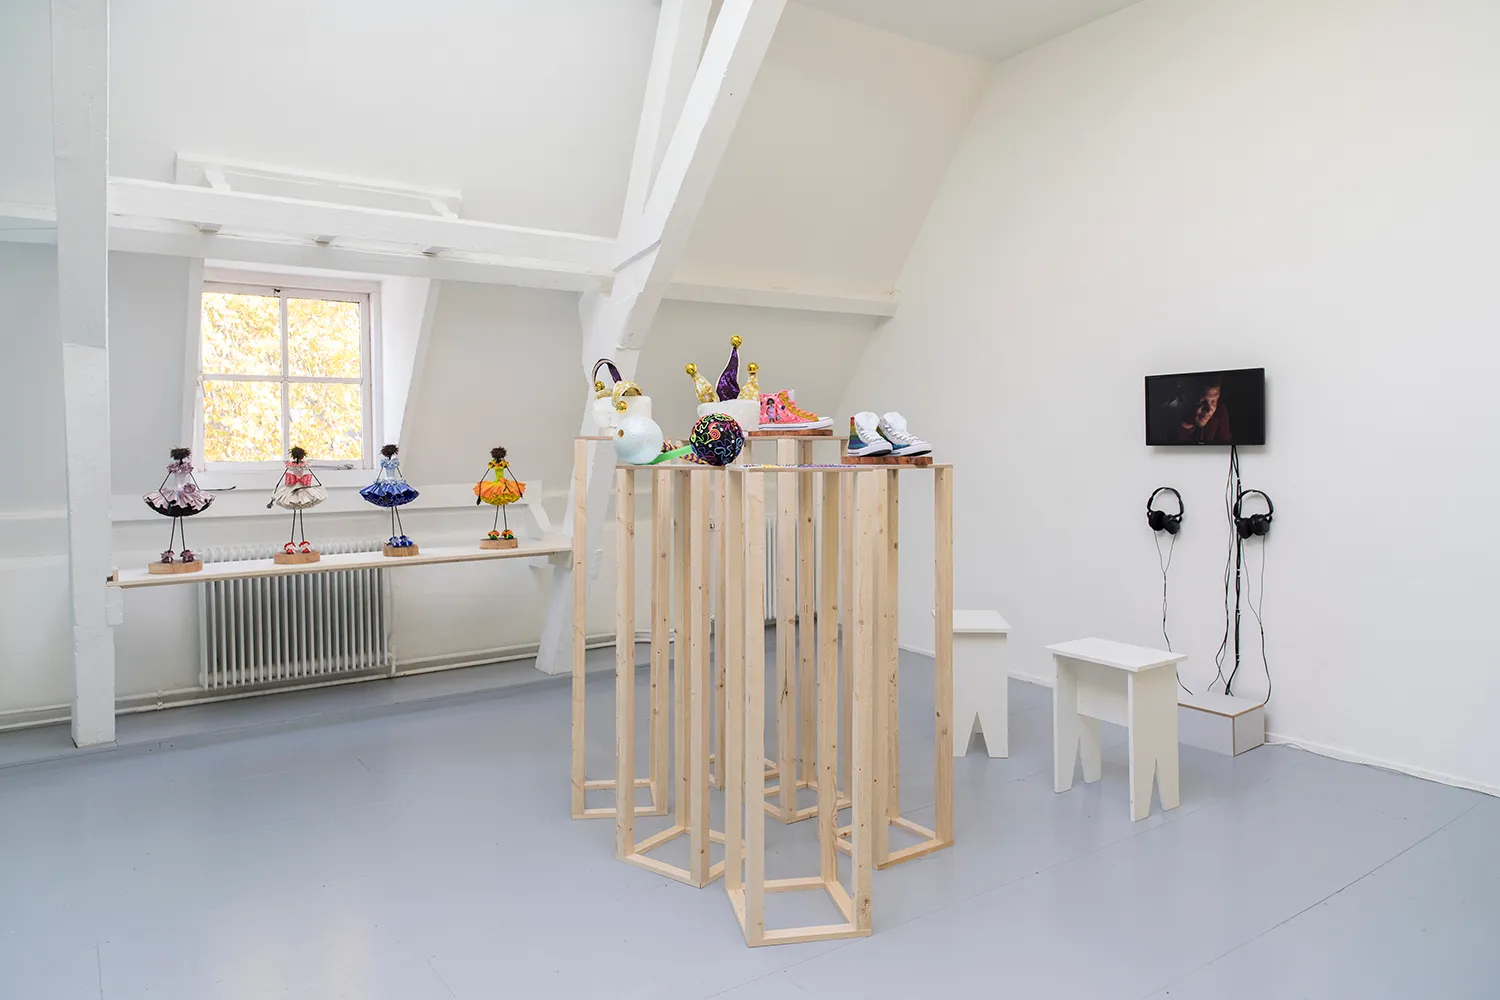 An exhibition space with pedestals with shoes and carnival hats, a shelve with dolls and a screen on a wall